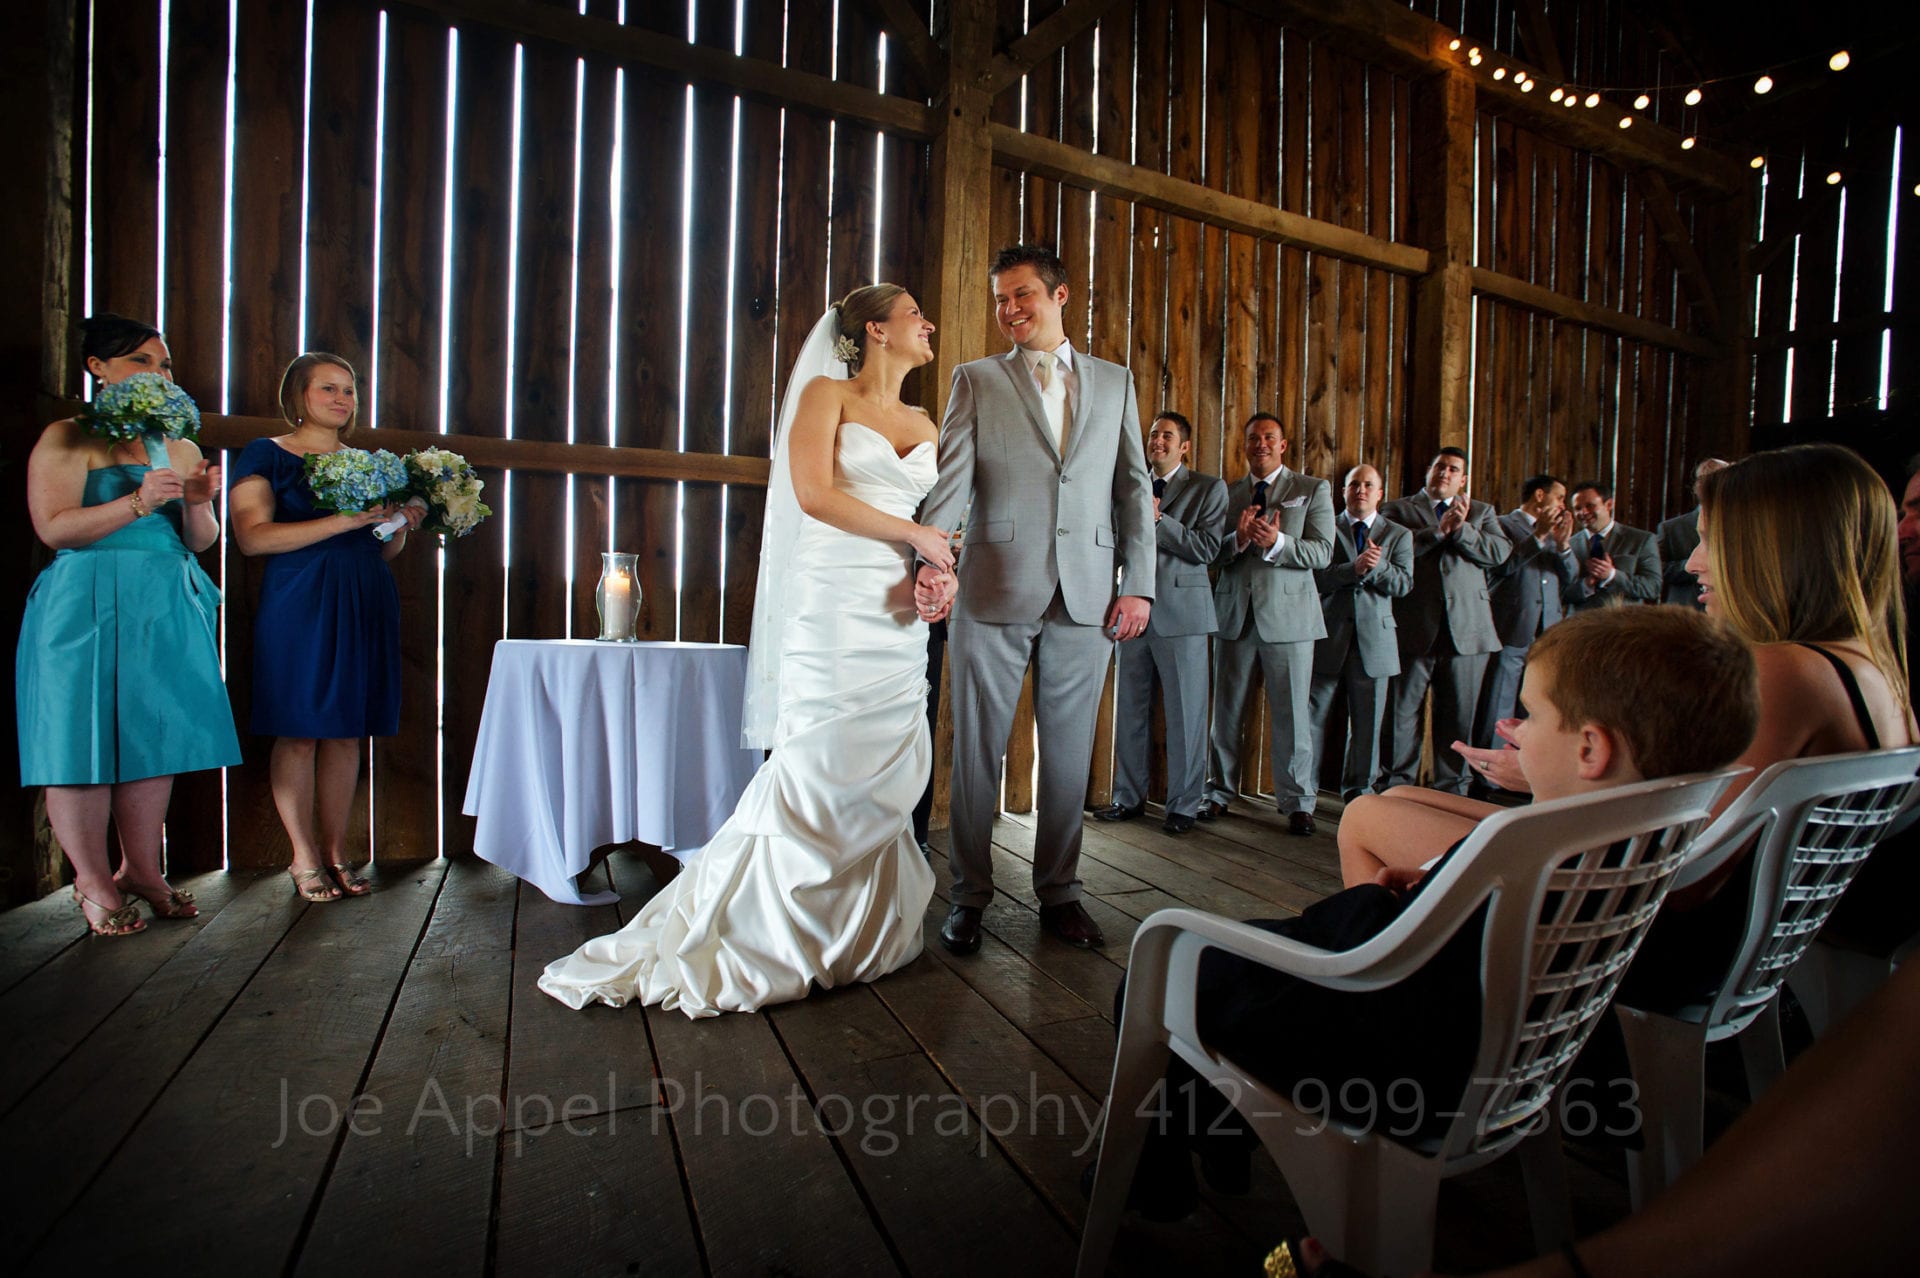 Armstrong Farms Weddings A bride and groom smile at each other as they are presented to their guests at the end of their wedding ceremony. They are standing in a barn with sunlight shining through the boards behind them.